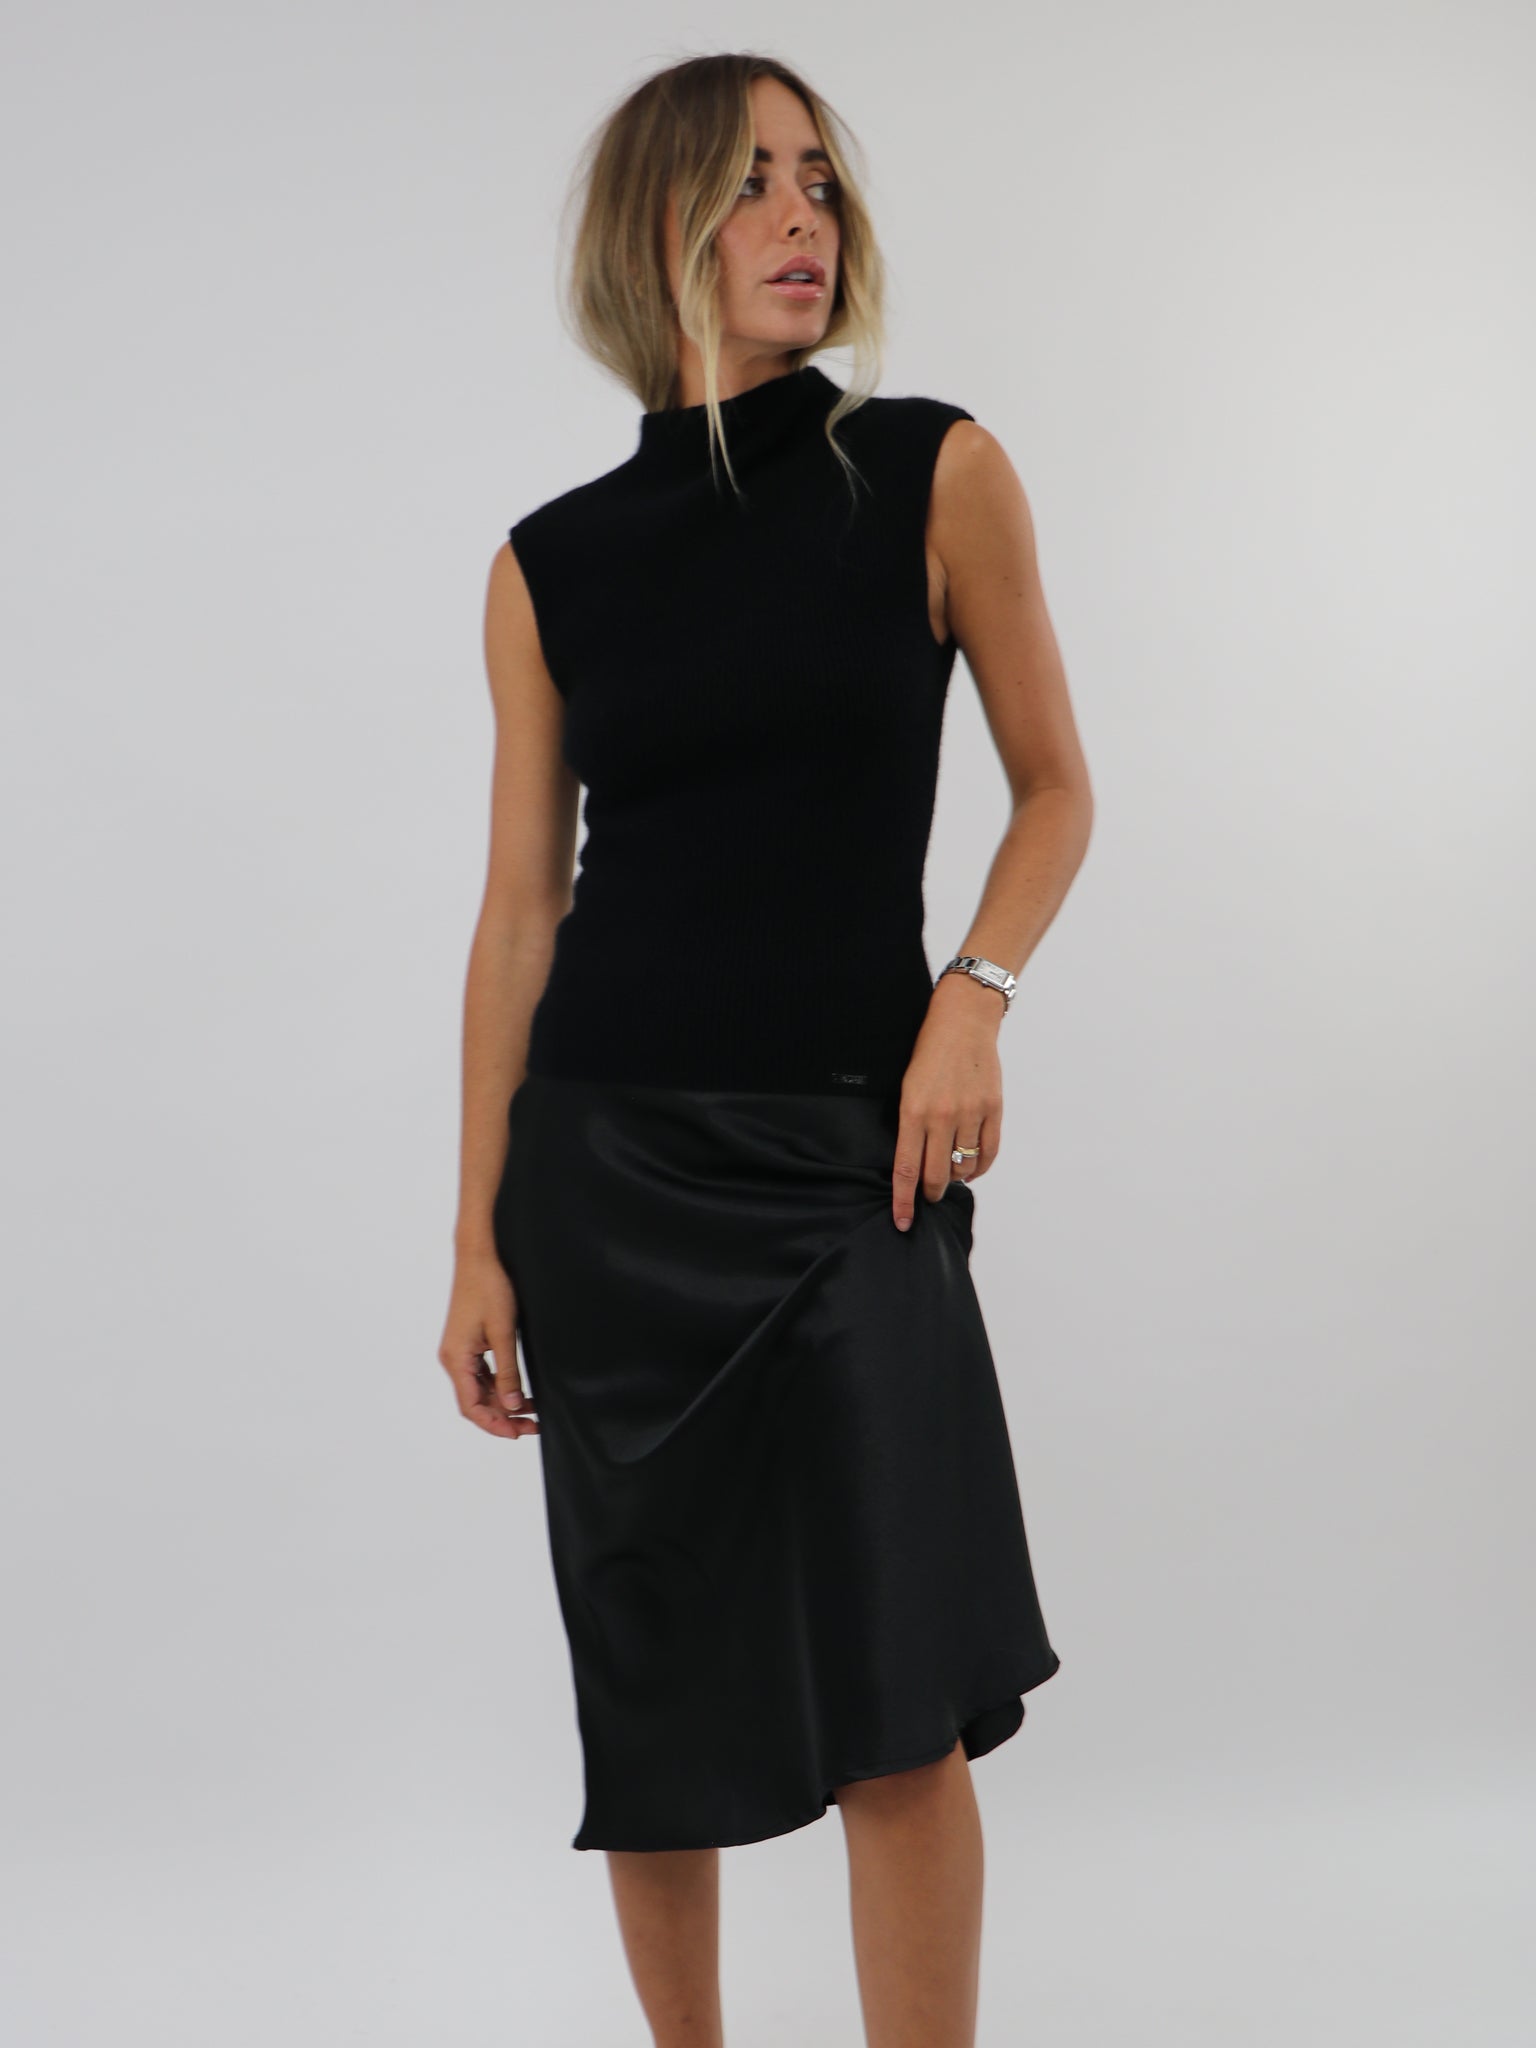 Sleeveless Cashmere fitted top